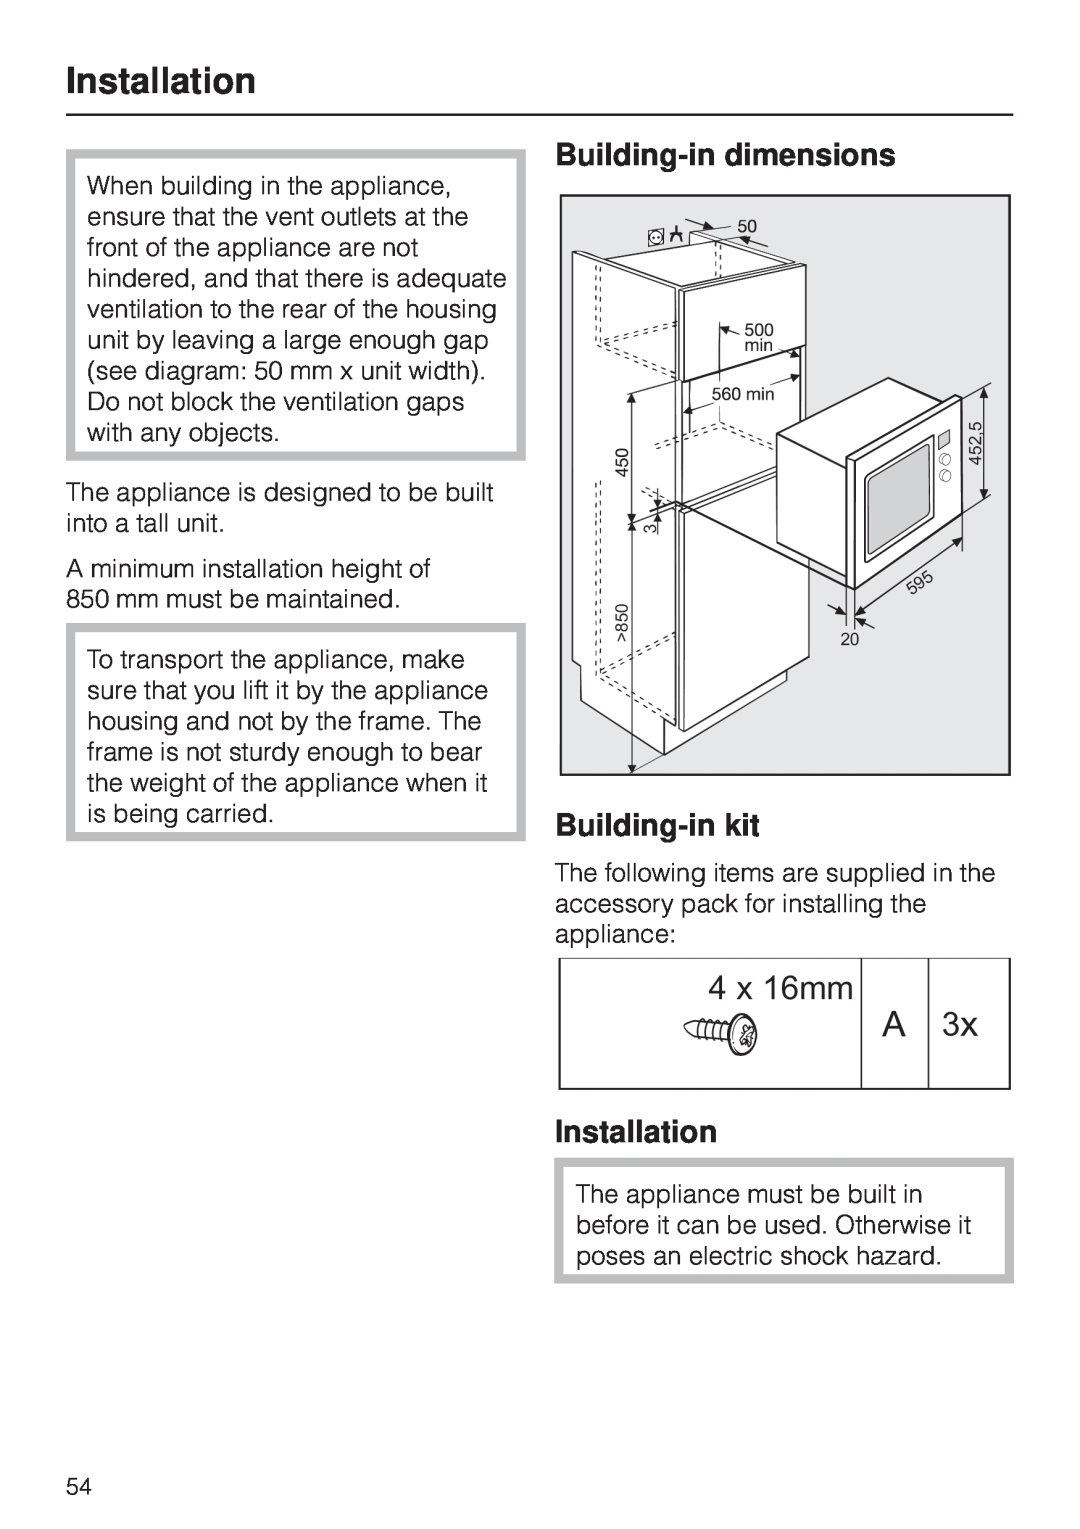 Miele M 8261 manual Installation, Building-in dimensions, Building-in kit, 4 x 16mm 